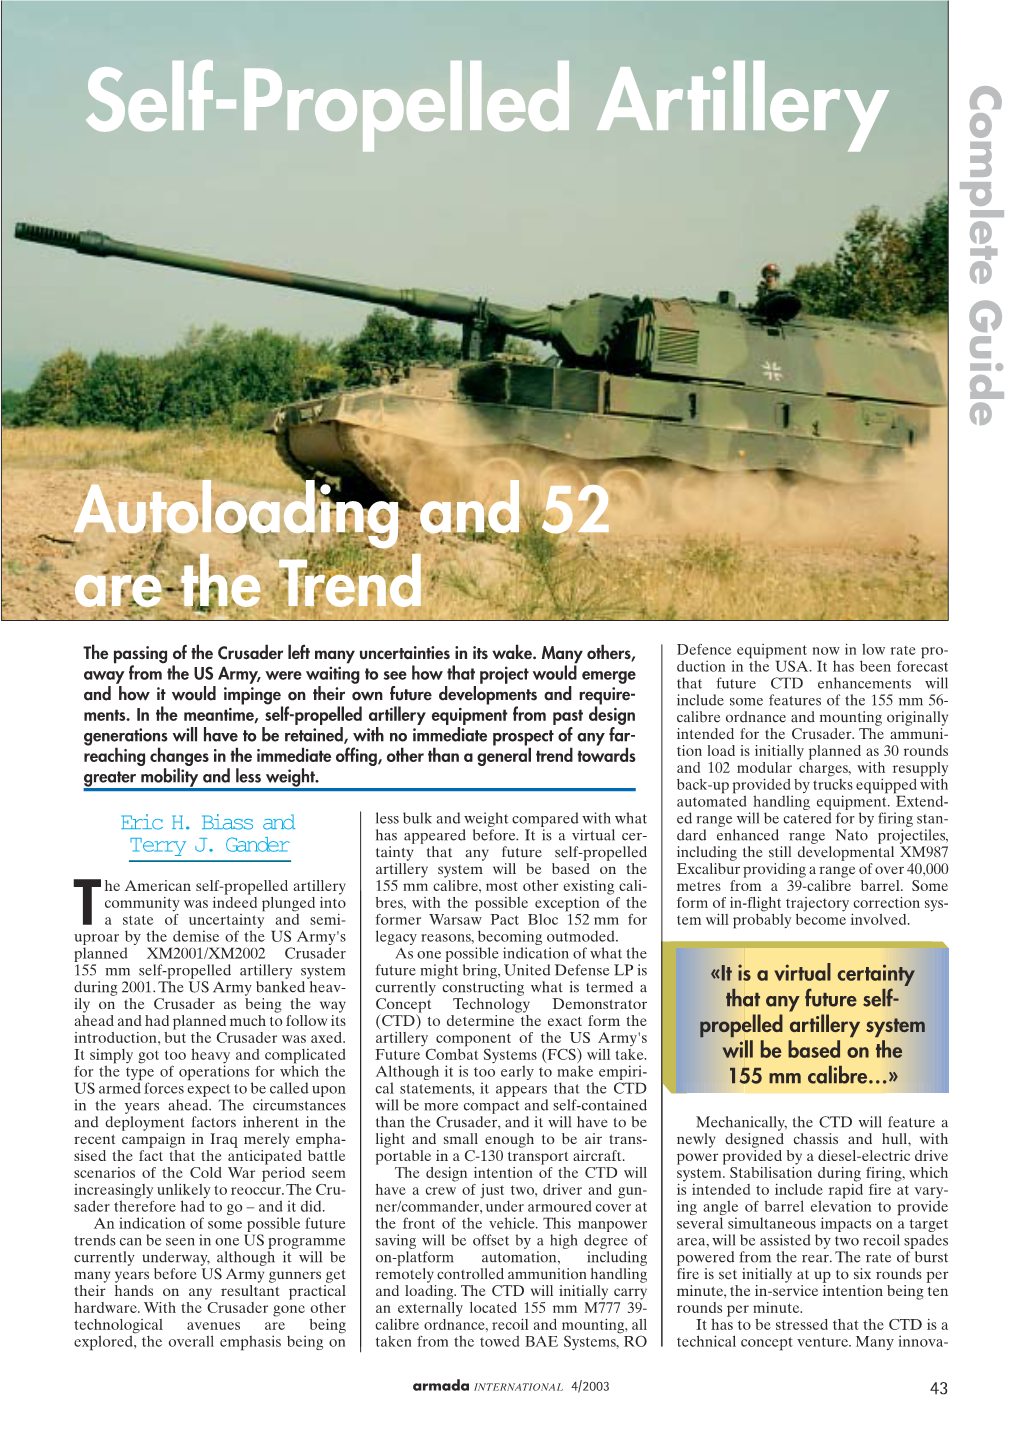 Self-Propelled Artillery Complete Guide